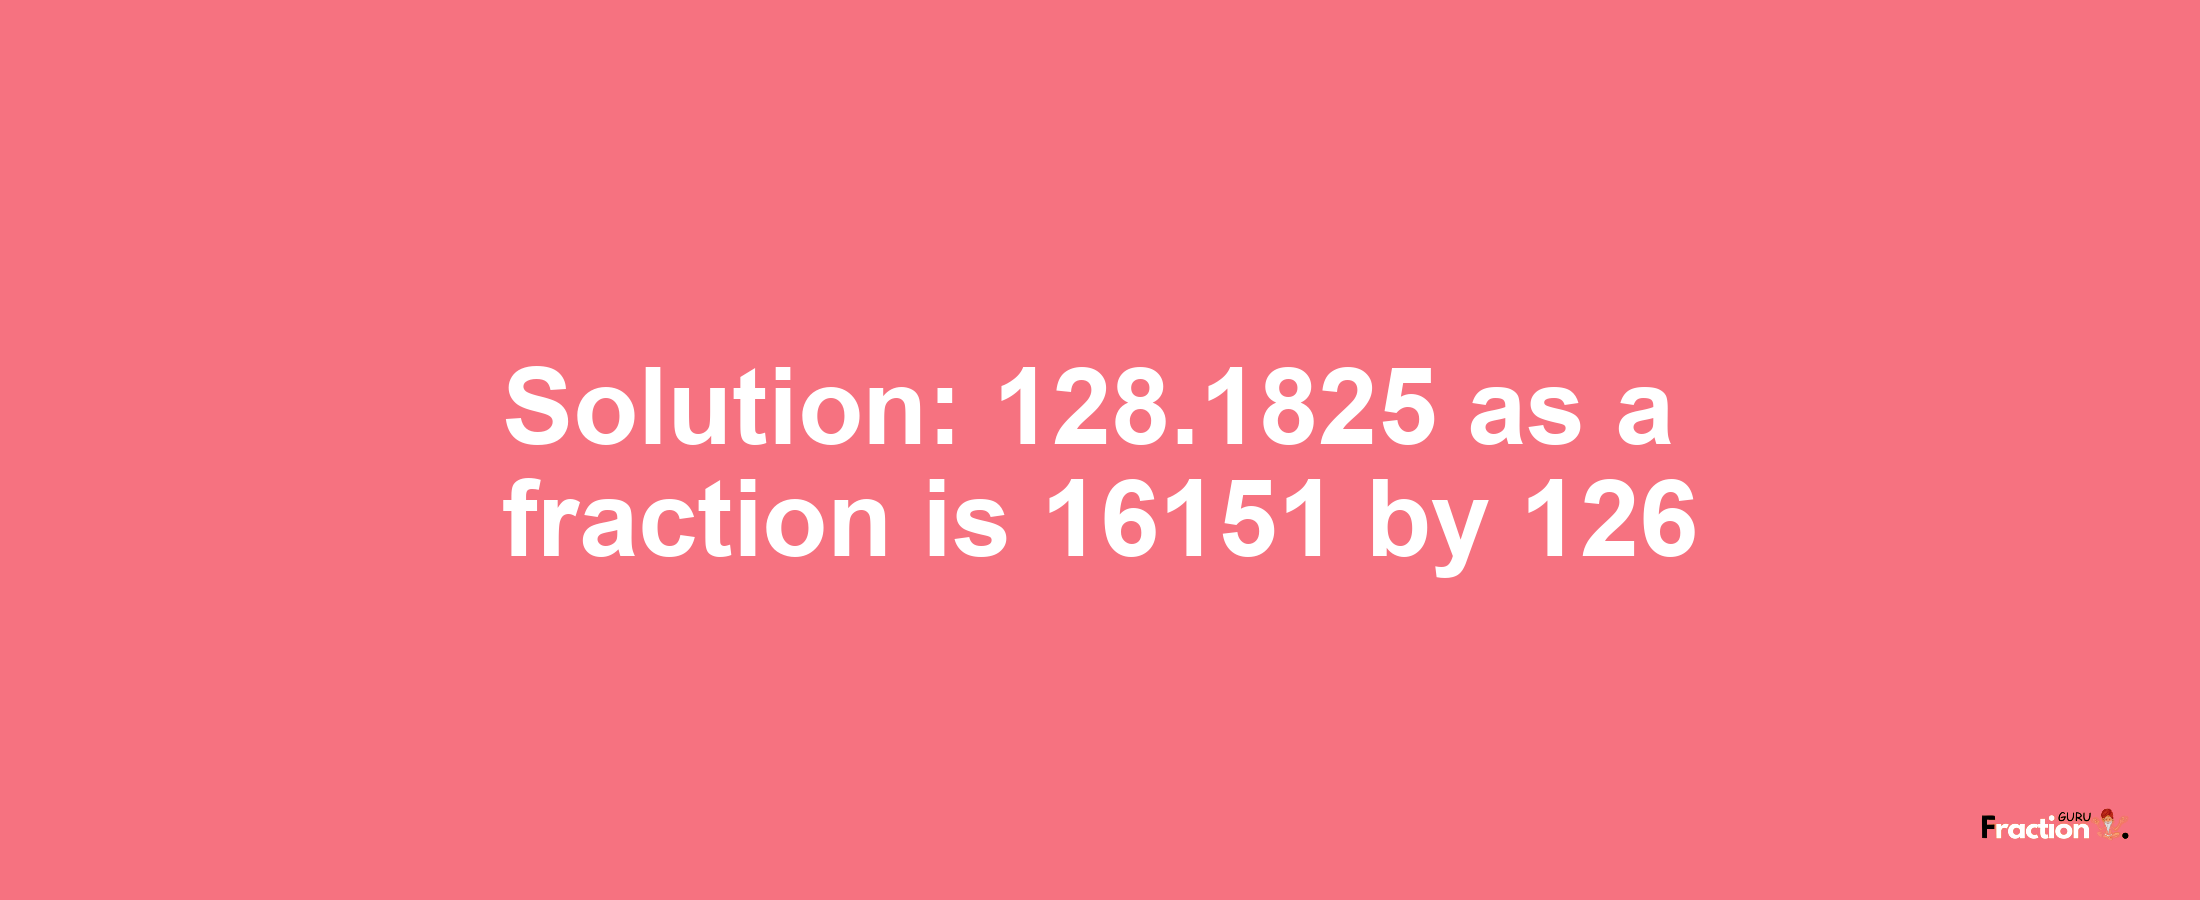 Solution:128.1825 as a fraction is 16151/126